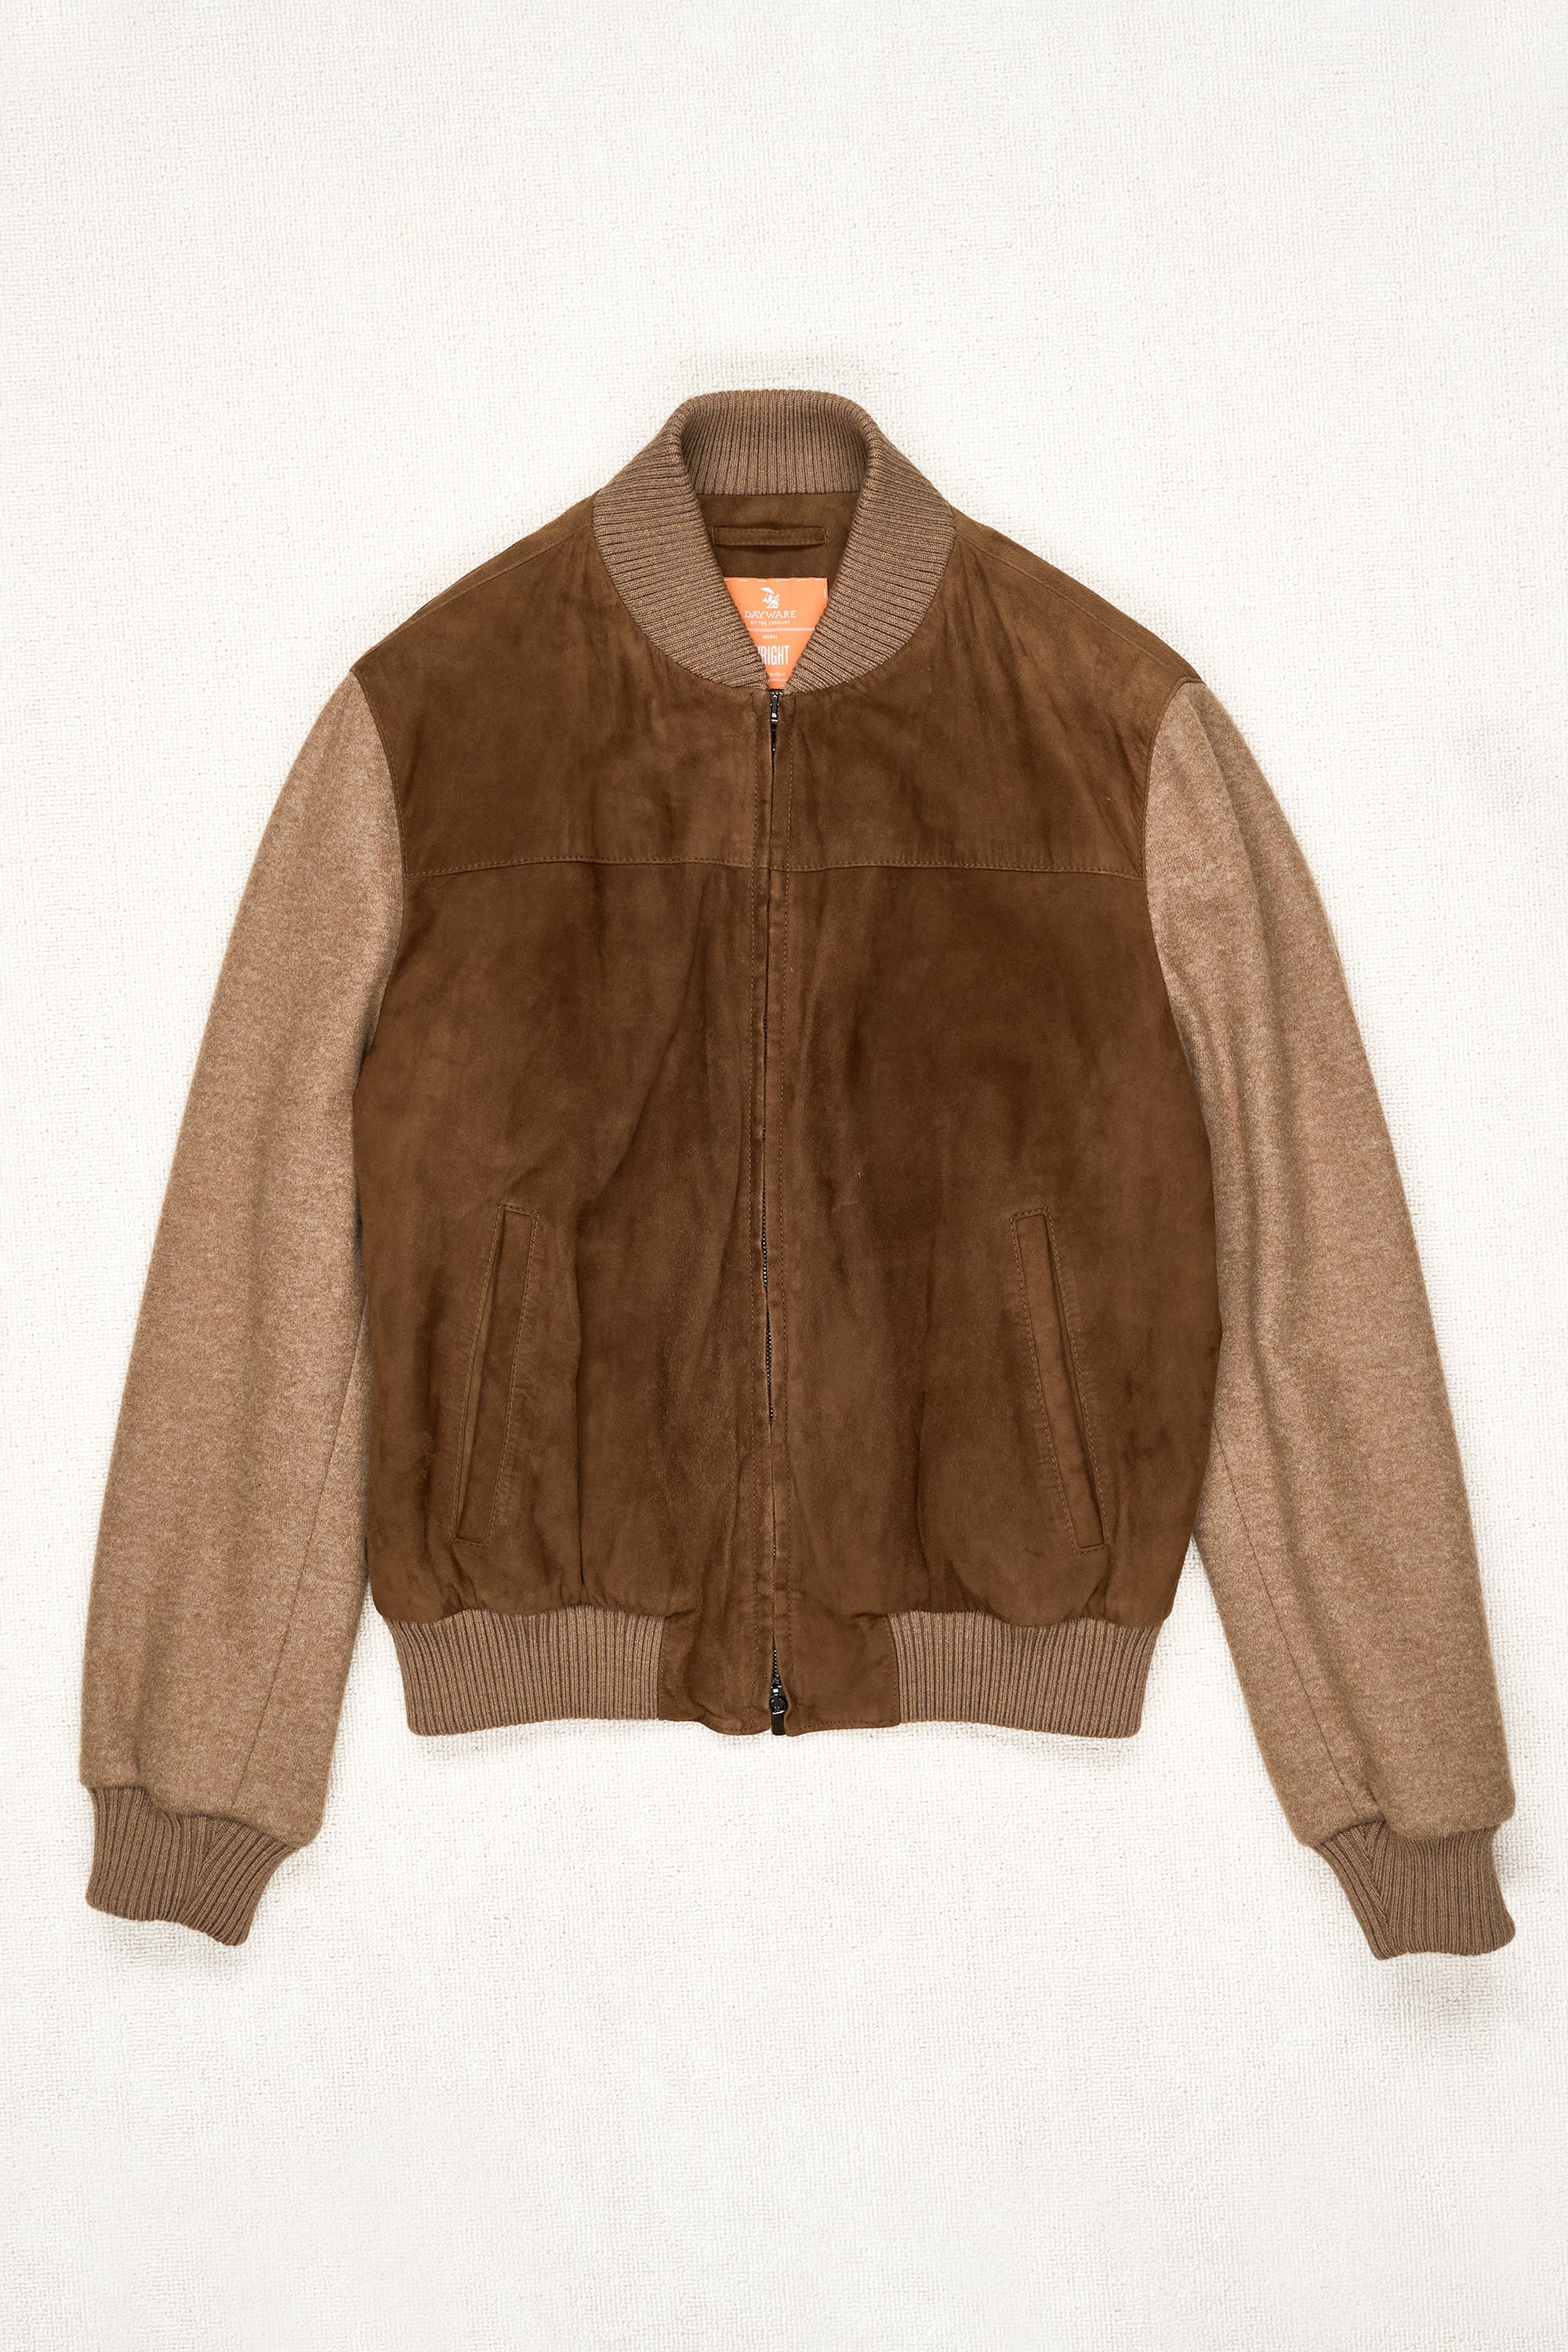 The Armoury Brown Suede Cashmere Varsity Jacket